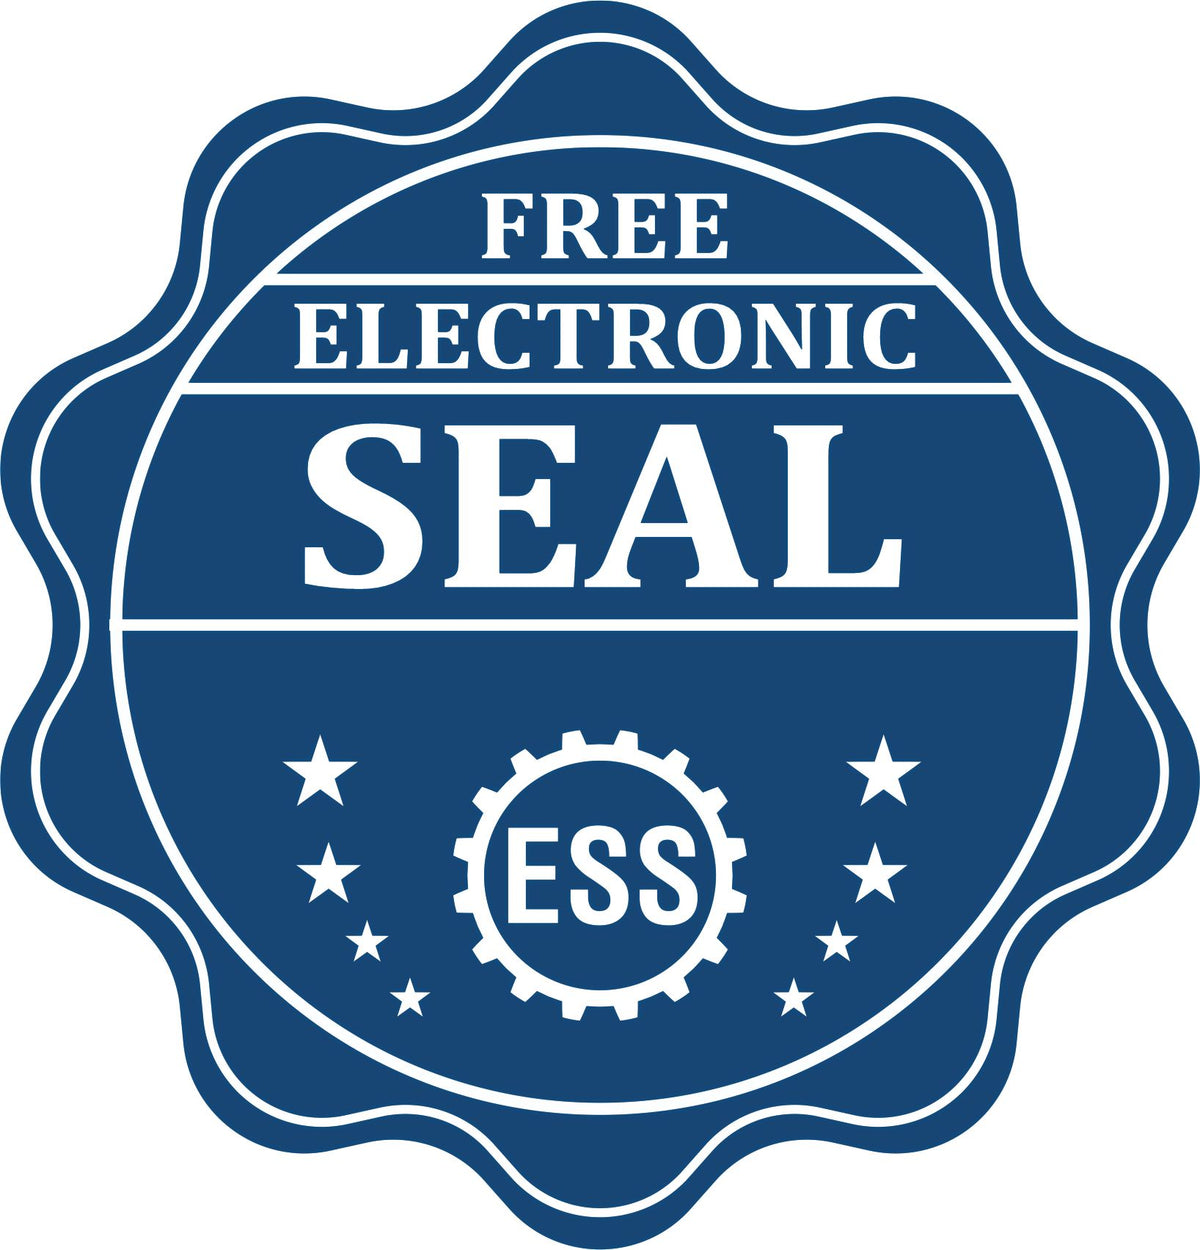 A badge showing a free electronic seal for the Soft Florida Professional Geologist Seal with stars and the ESS gear on the emblem.